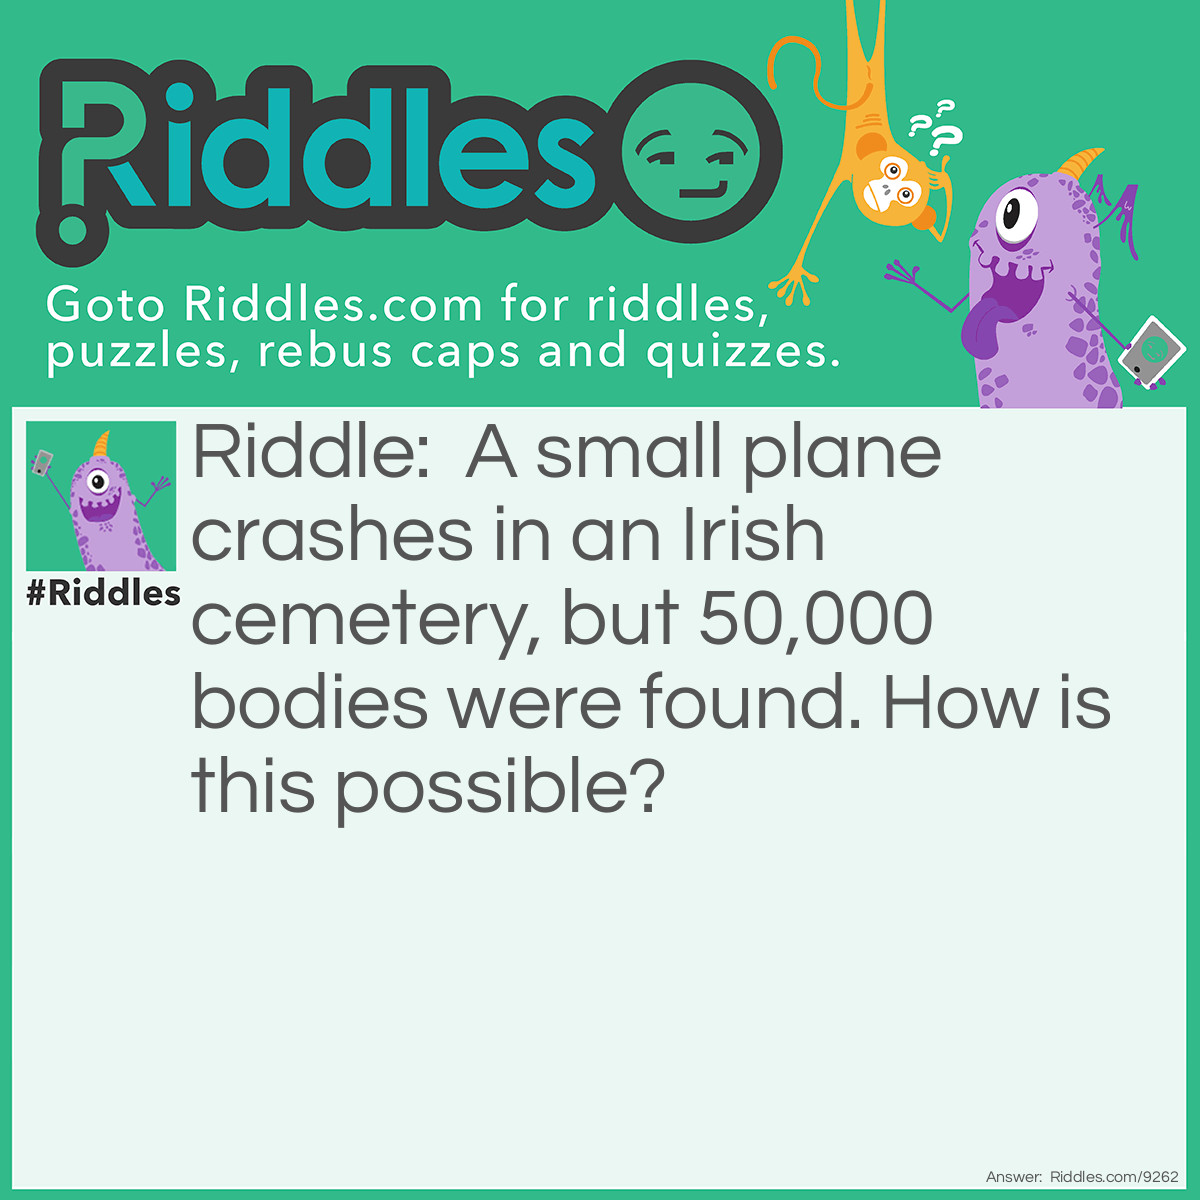 Riddle: A small plane crashes in an Irish cemetery, but 50,000 bodies were found. How is this possible? Answer: They crashed in a cemetery.